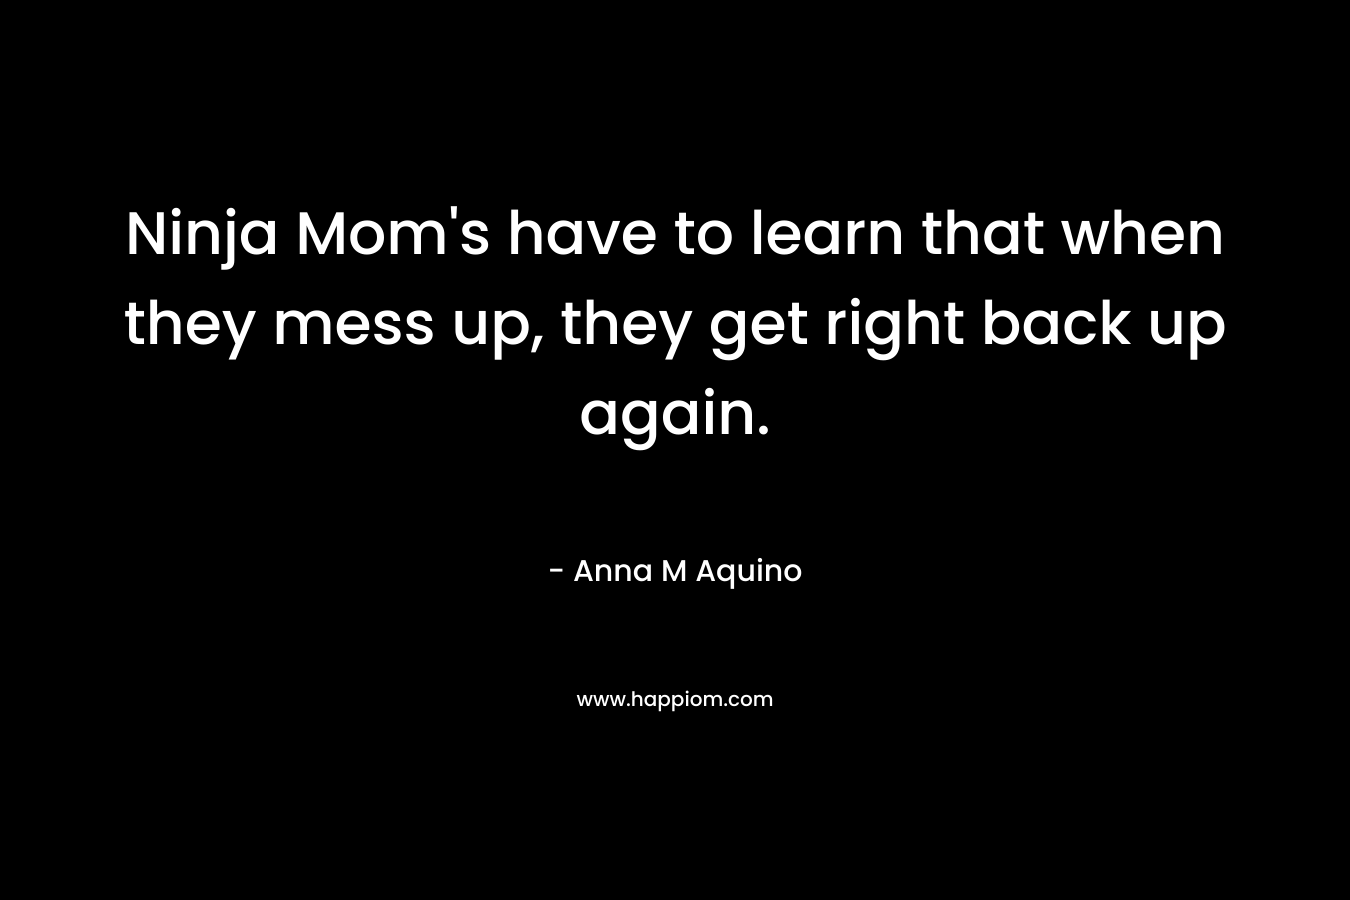 Ninja Mom’s have to learn that when they mess up, they get right back up again. – Anna M Aquino